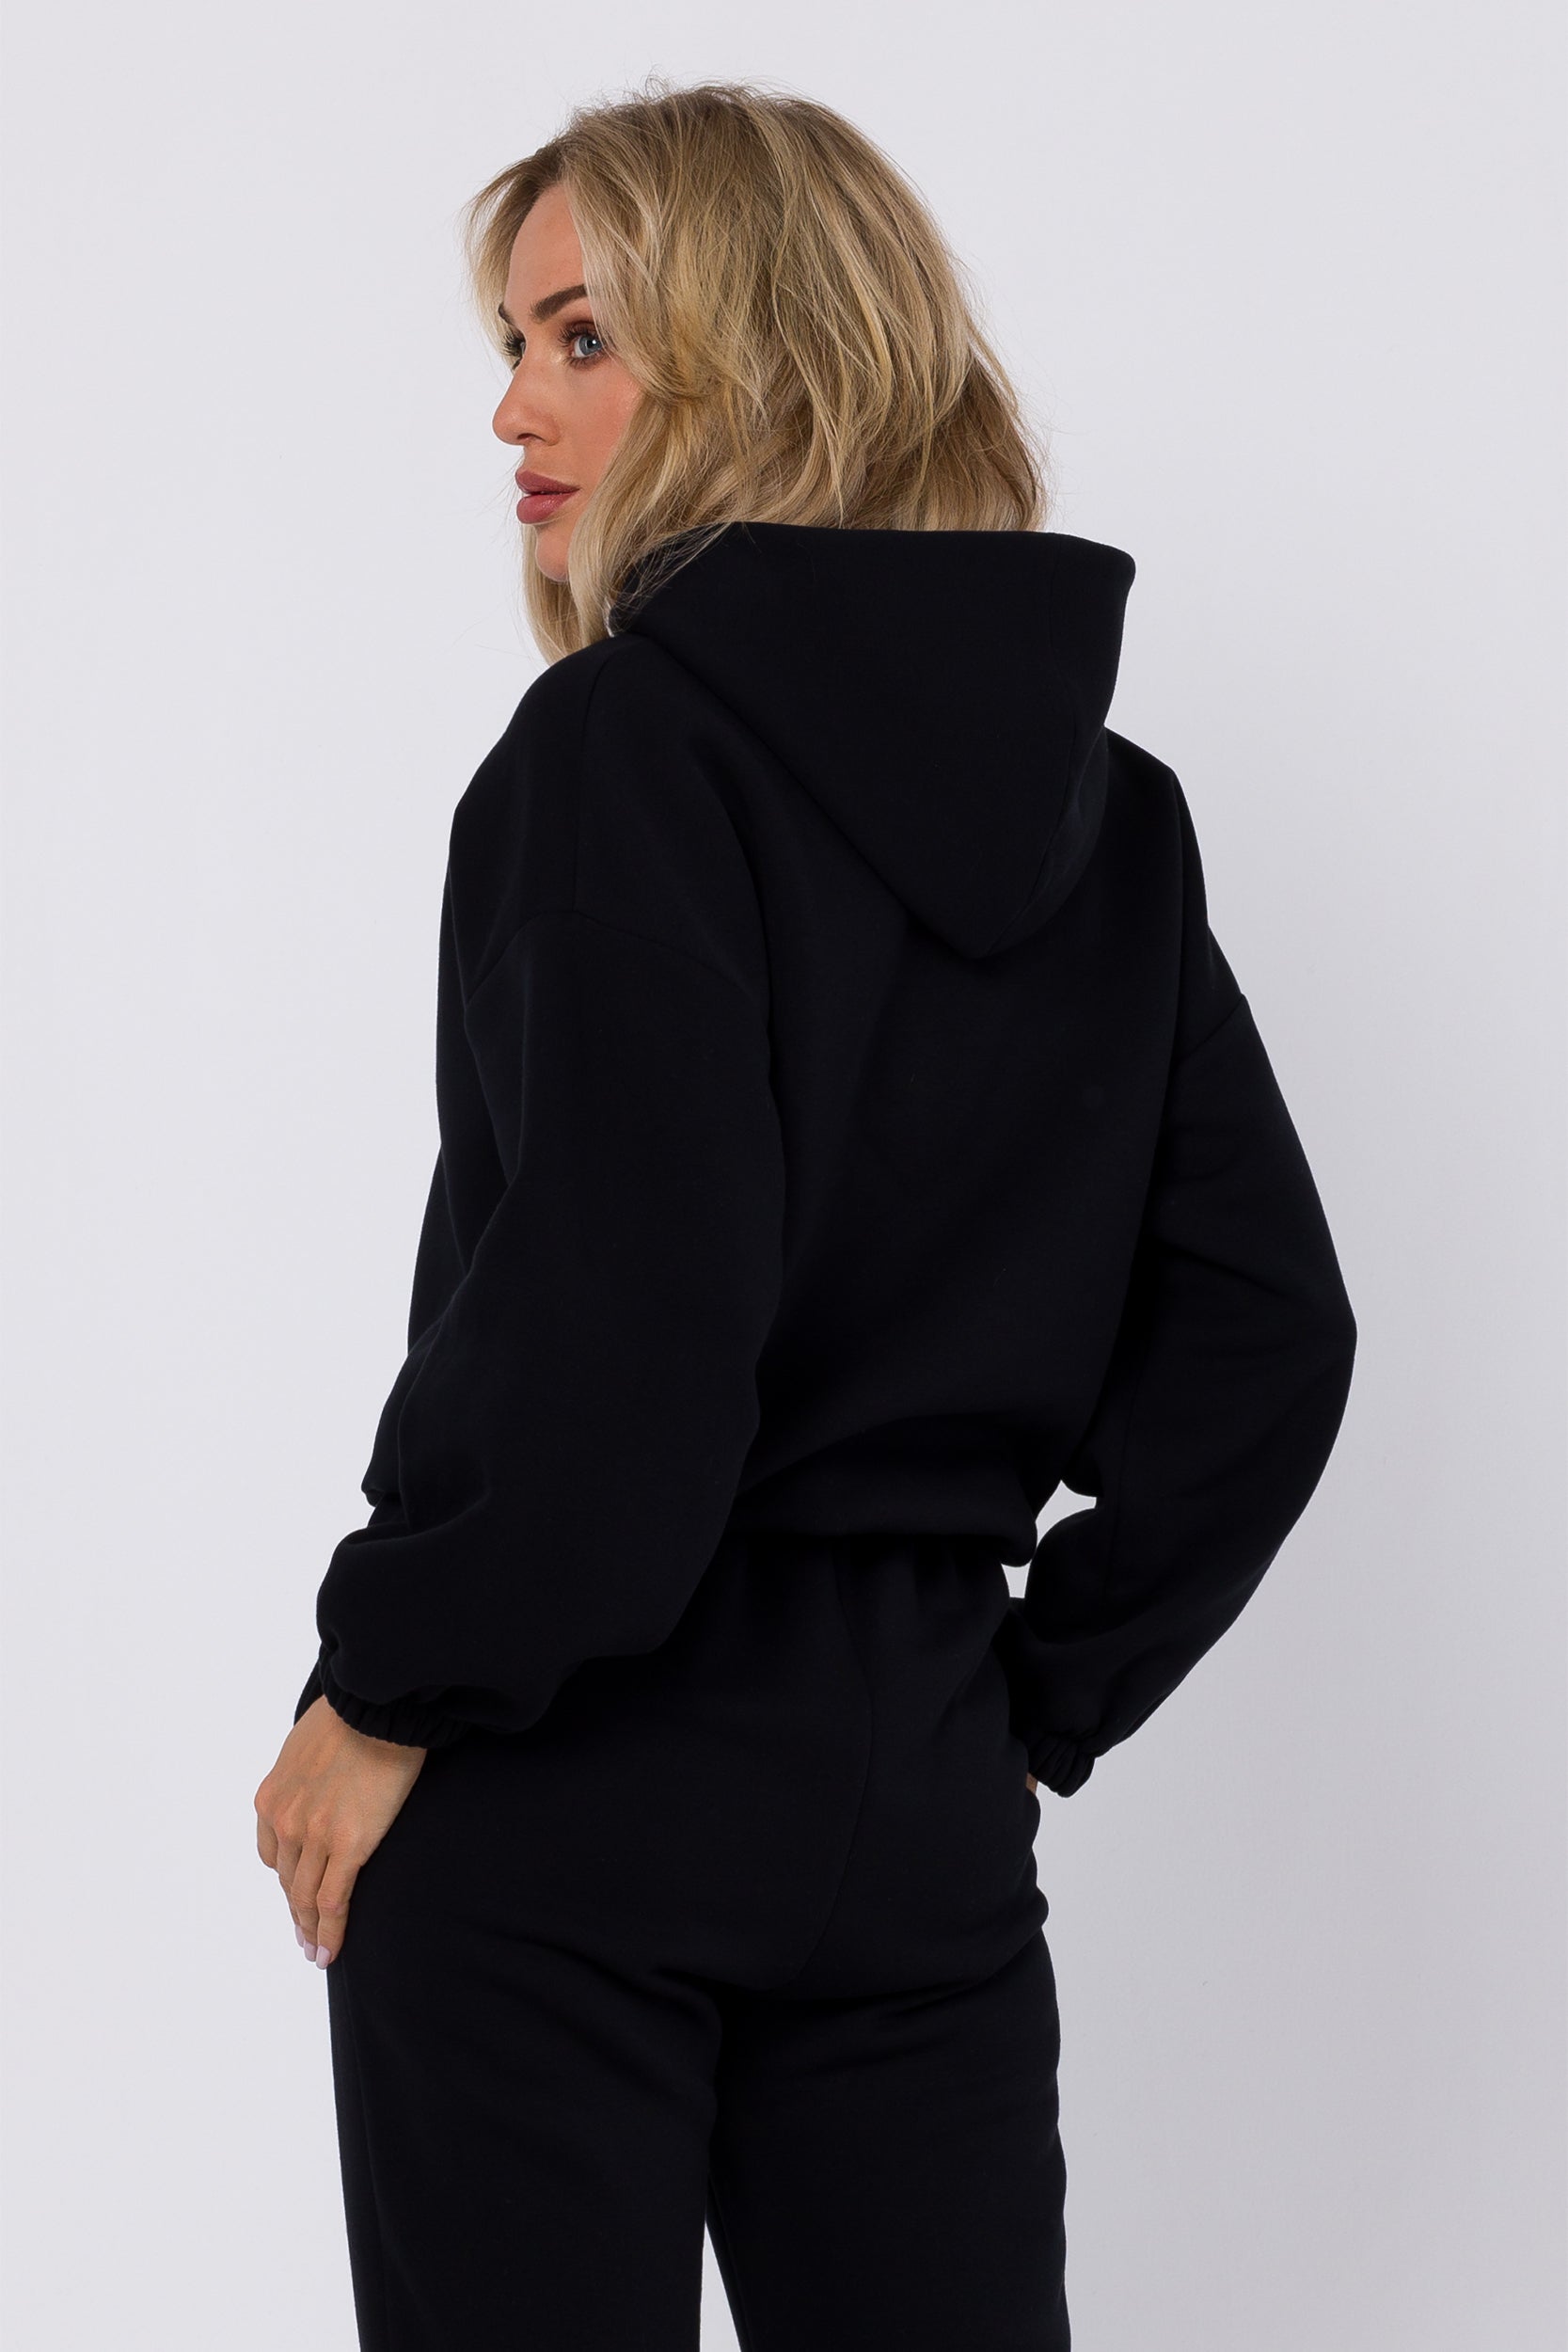 Complete your contemporary look with our Hoodie Sweatshirt Front Stitching. Crafted from luxurious knit fabric to match our Joggers Front Stitching, this hooded sweatshirt features decorative vertical stitching in the front. With long sleeves and elastic hems, it offers warmth and style. Wear it as part of a set or mix and match to make a versatile fashion statement.